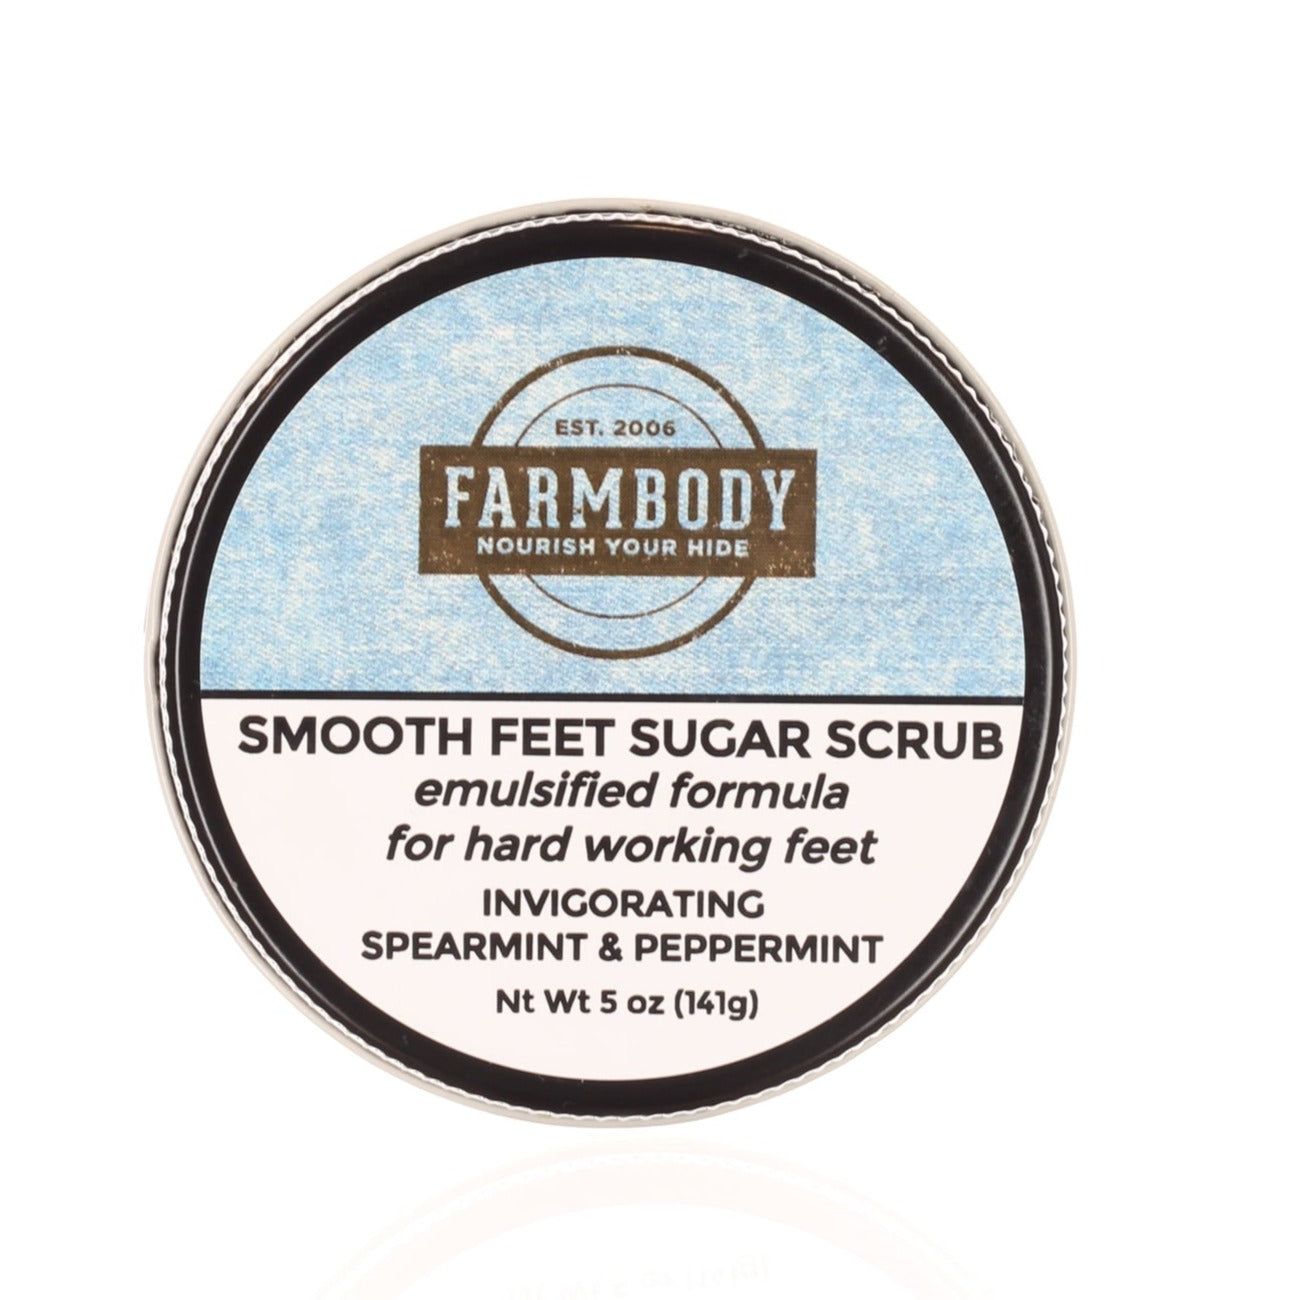 Farmbody  Emulsified Sugar Scrub for Smooth Feet and Calluses in peppermint and spearmint